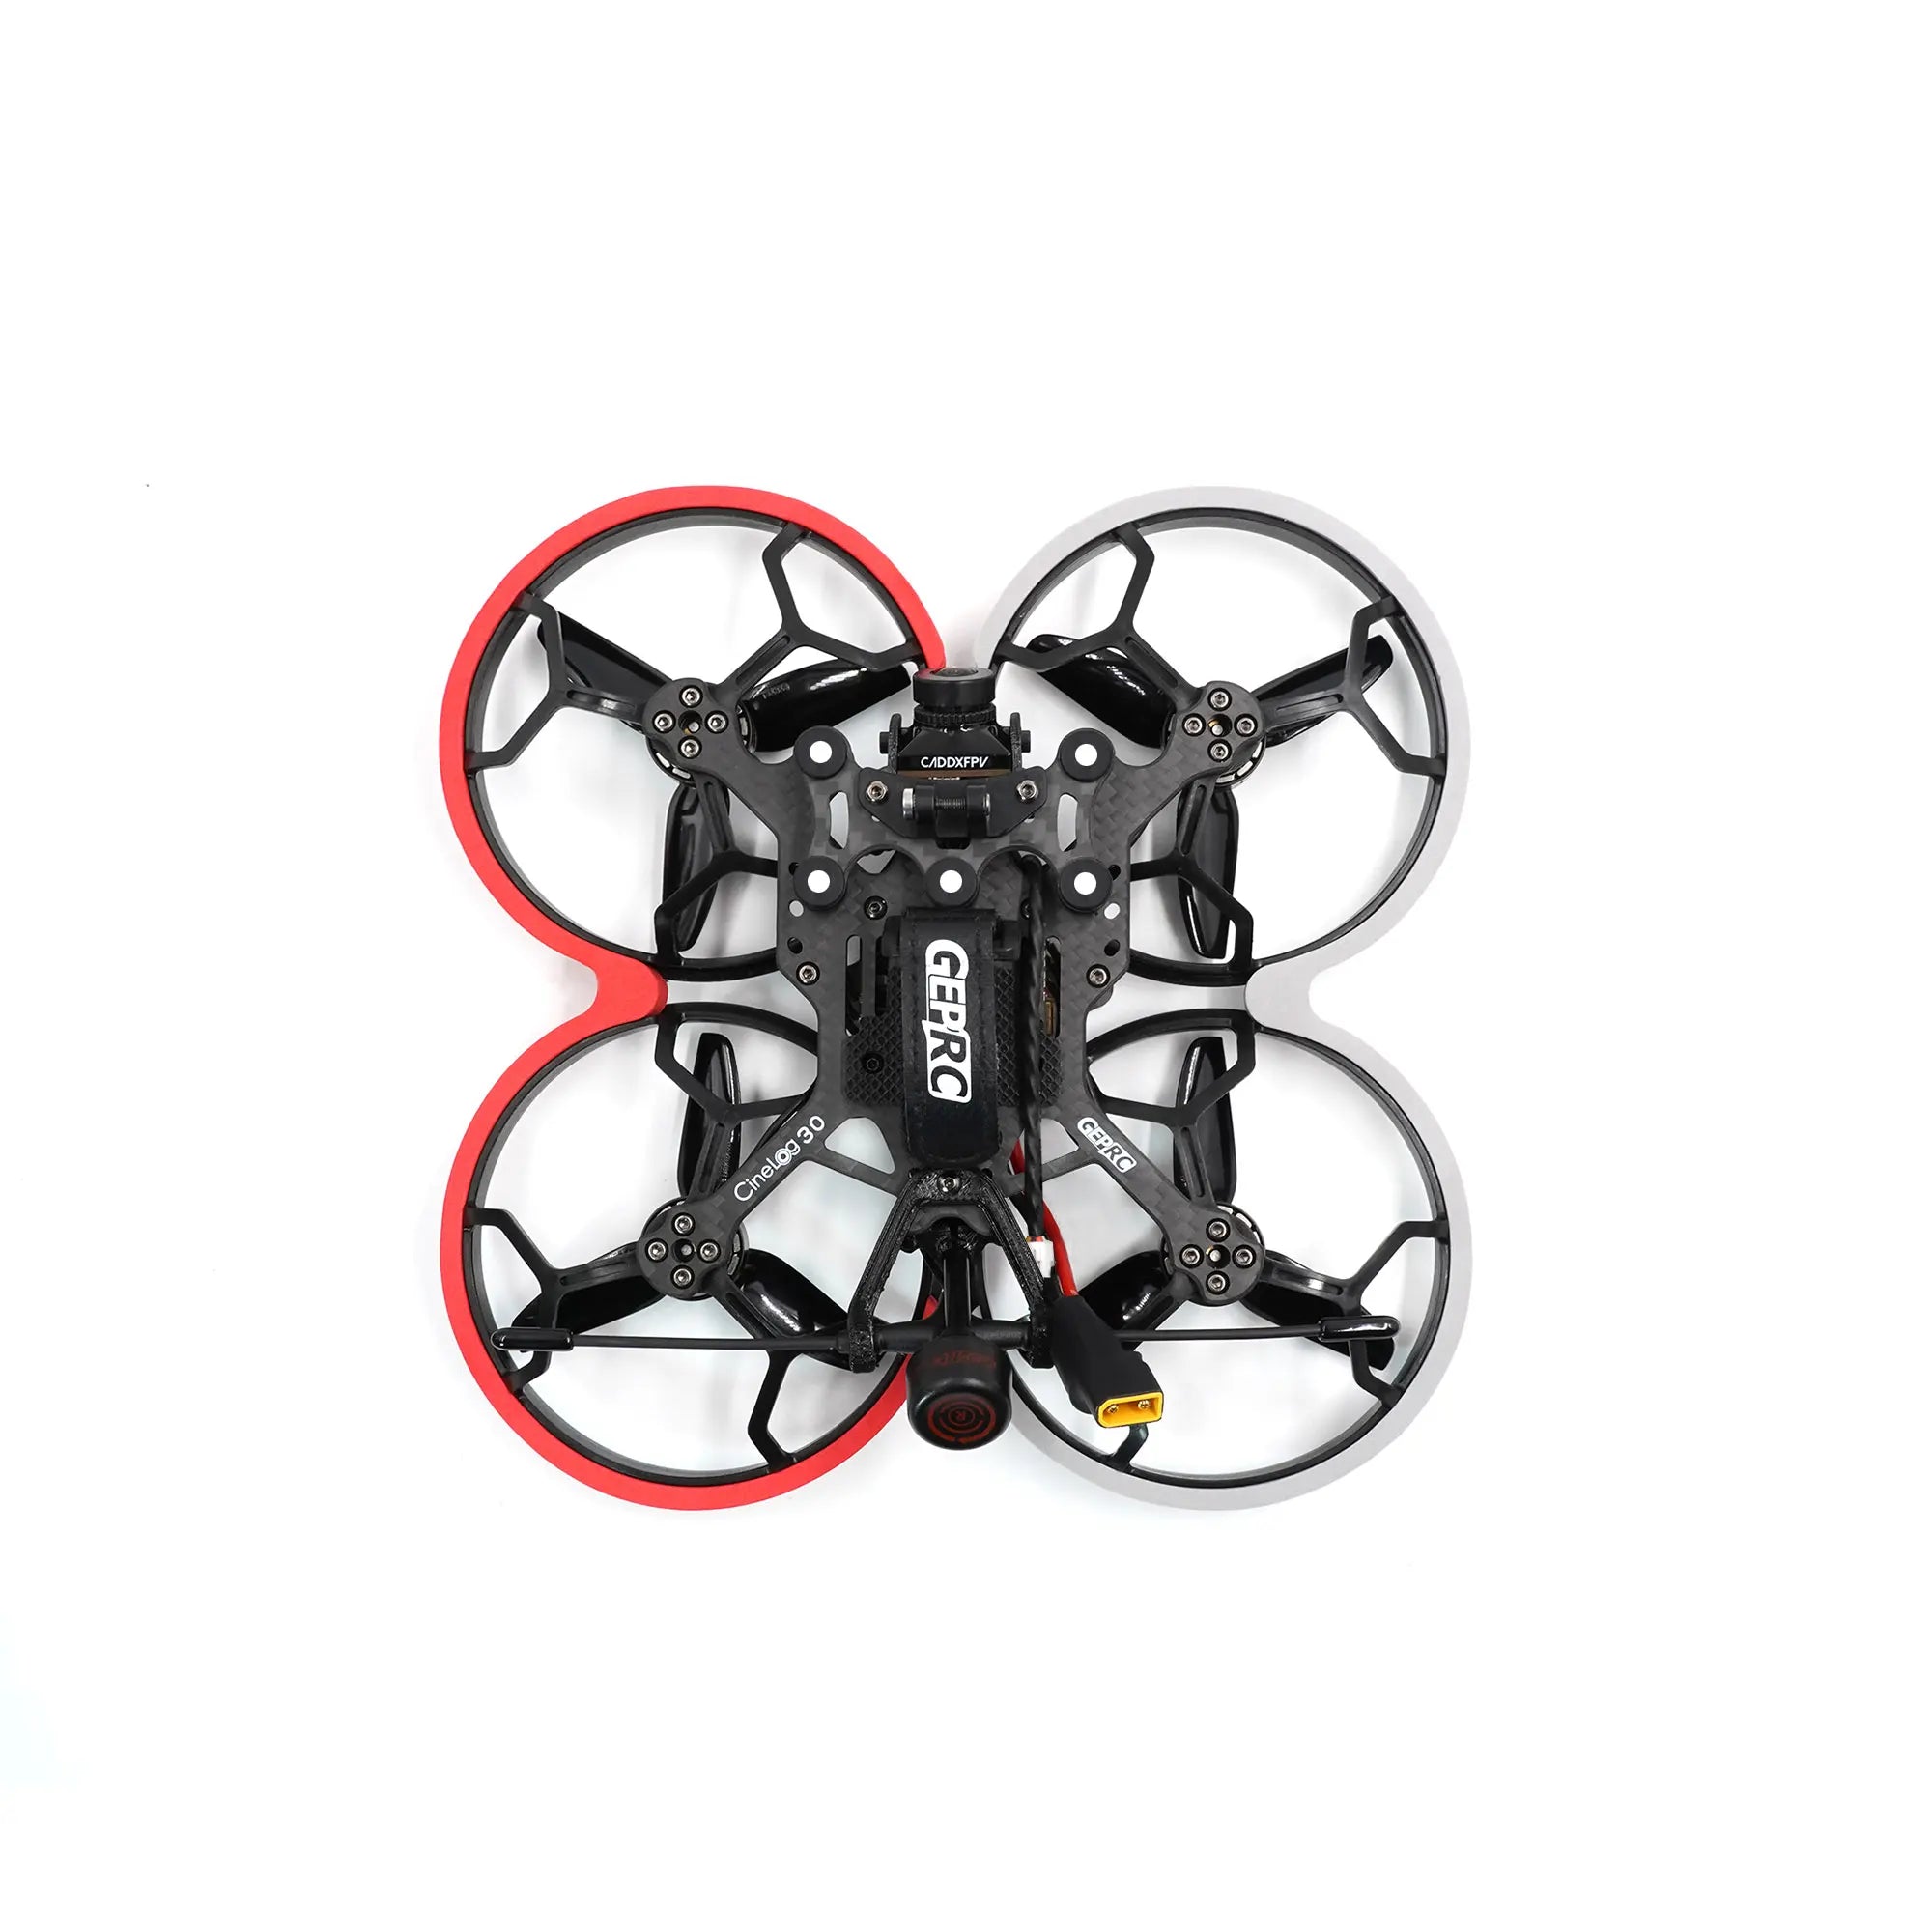 GEPRC CineLog30 Cinewhoop Drone, the CineLog30 Analog offers an exciting and immersive flying experience . whether you're